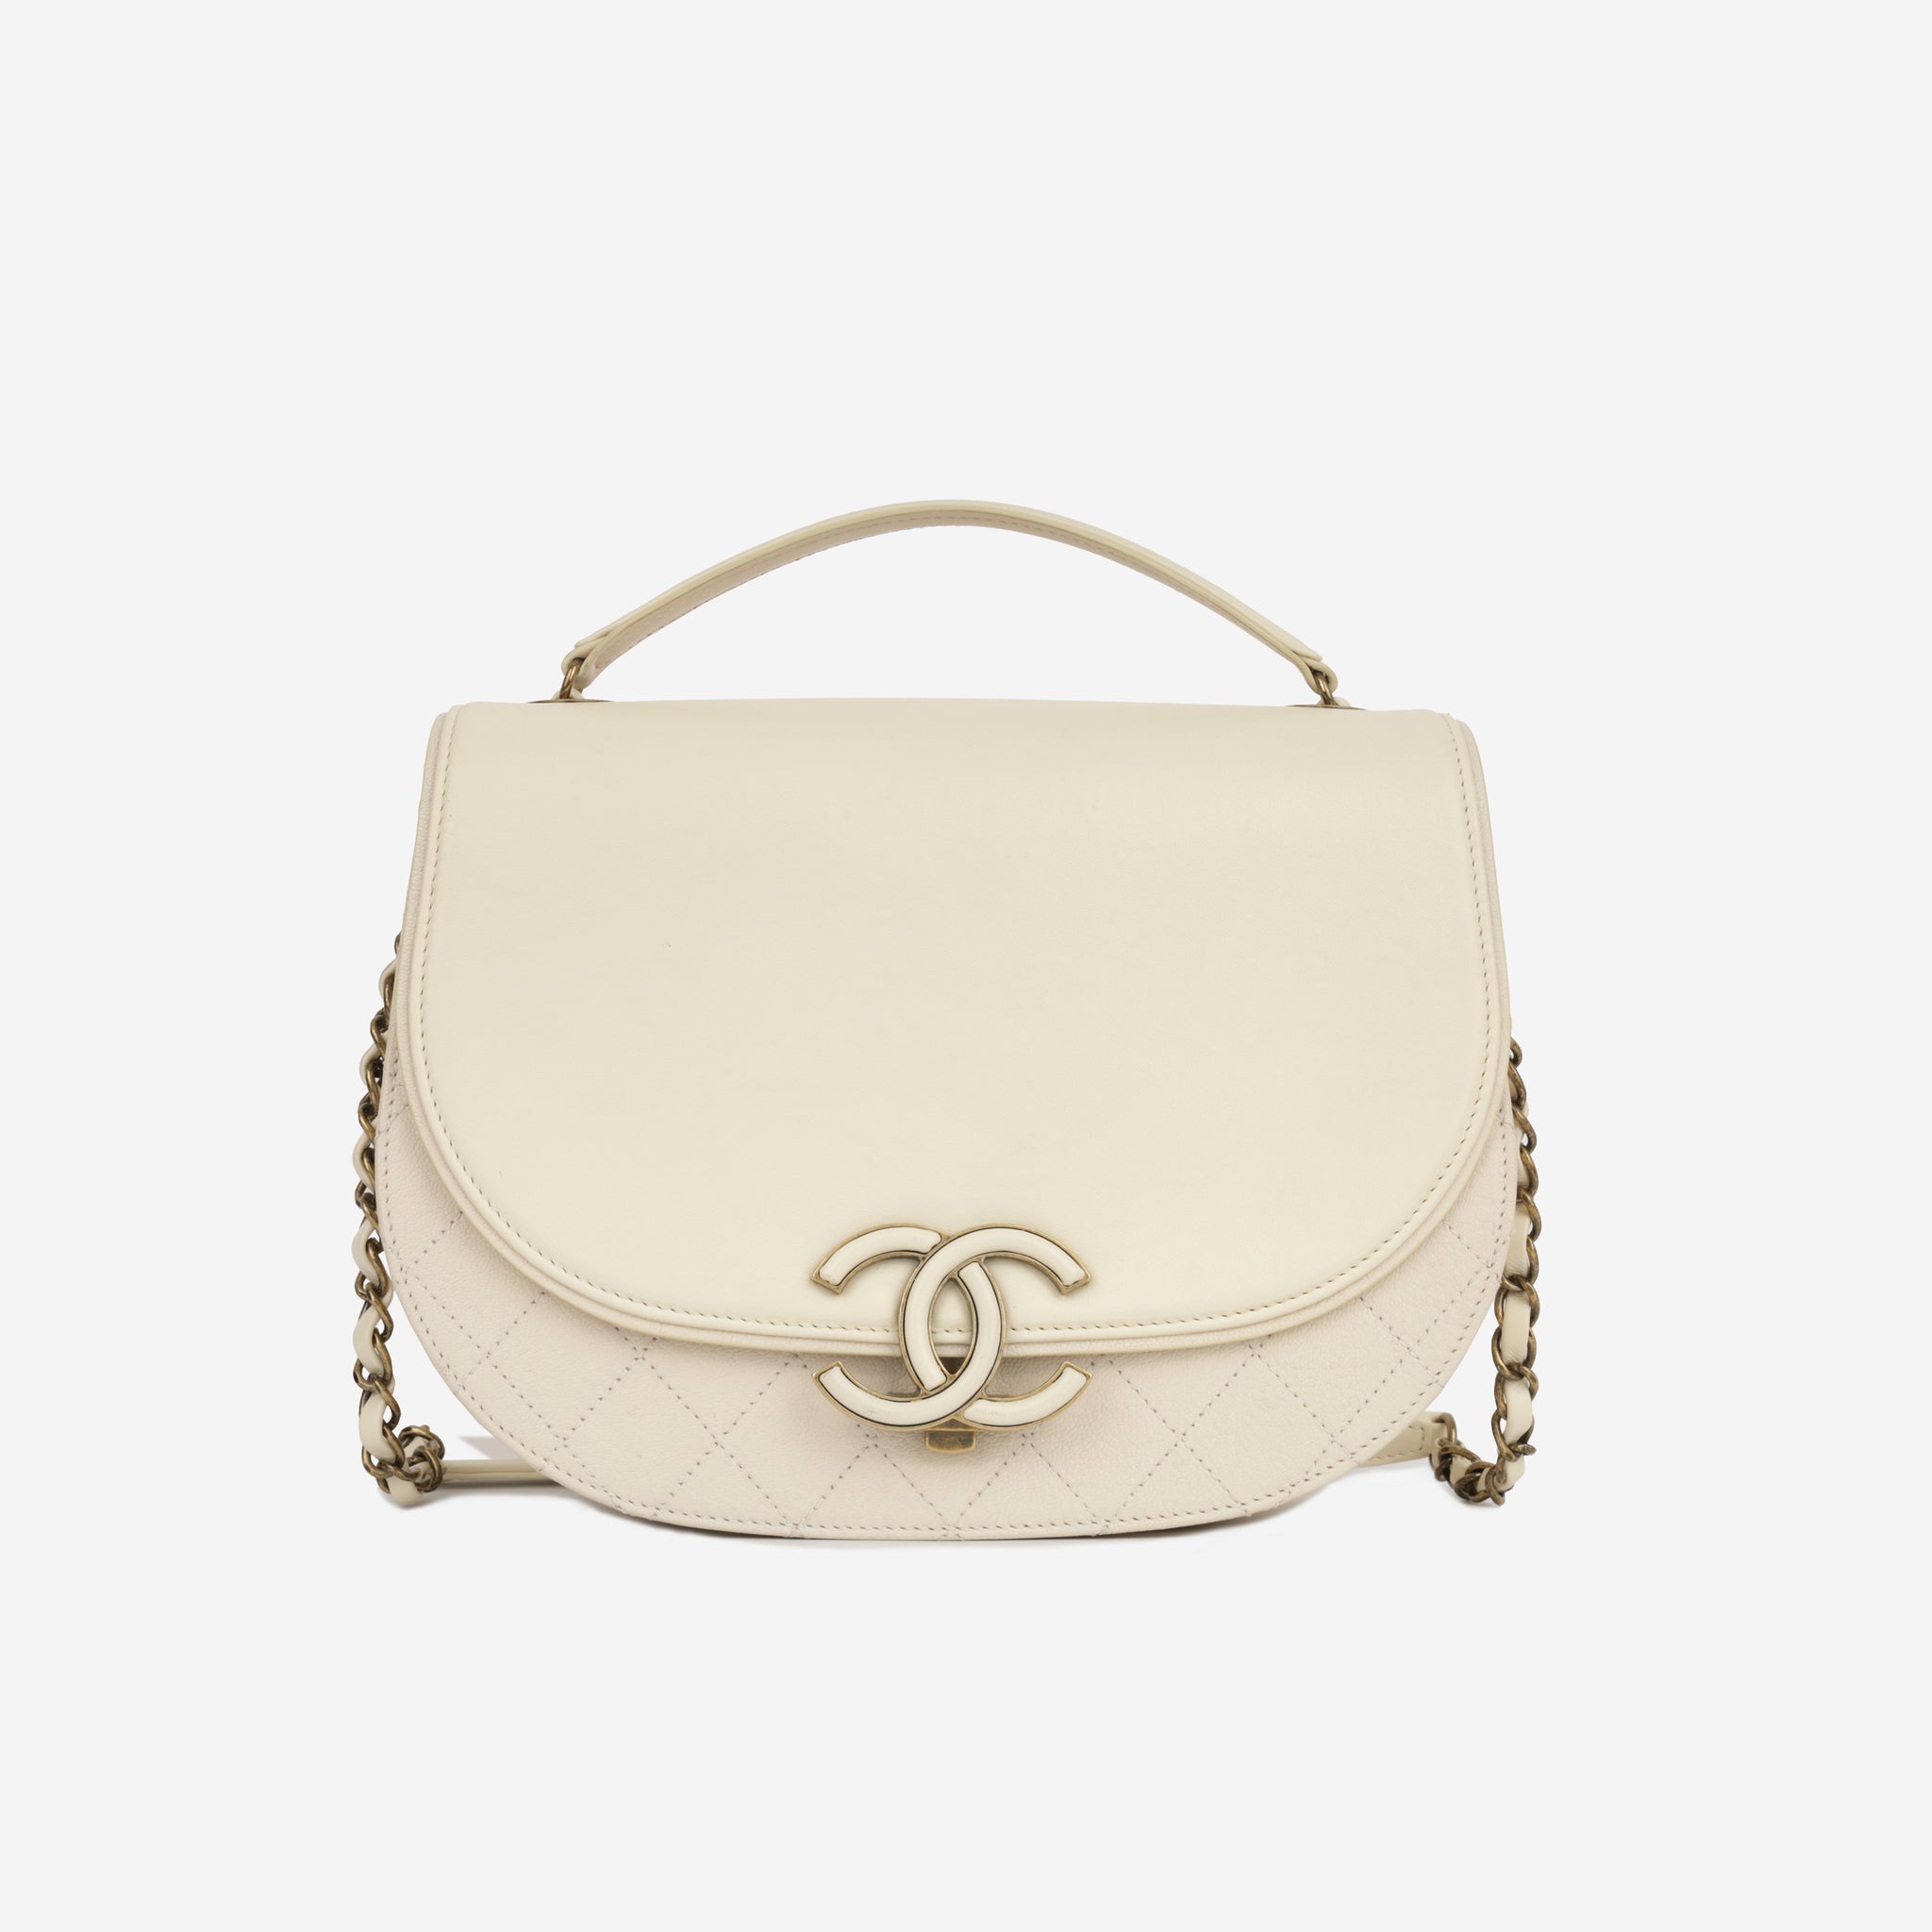 Chanel - Coco Curve Flap Bag - Ivory - AGHW - 2017